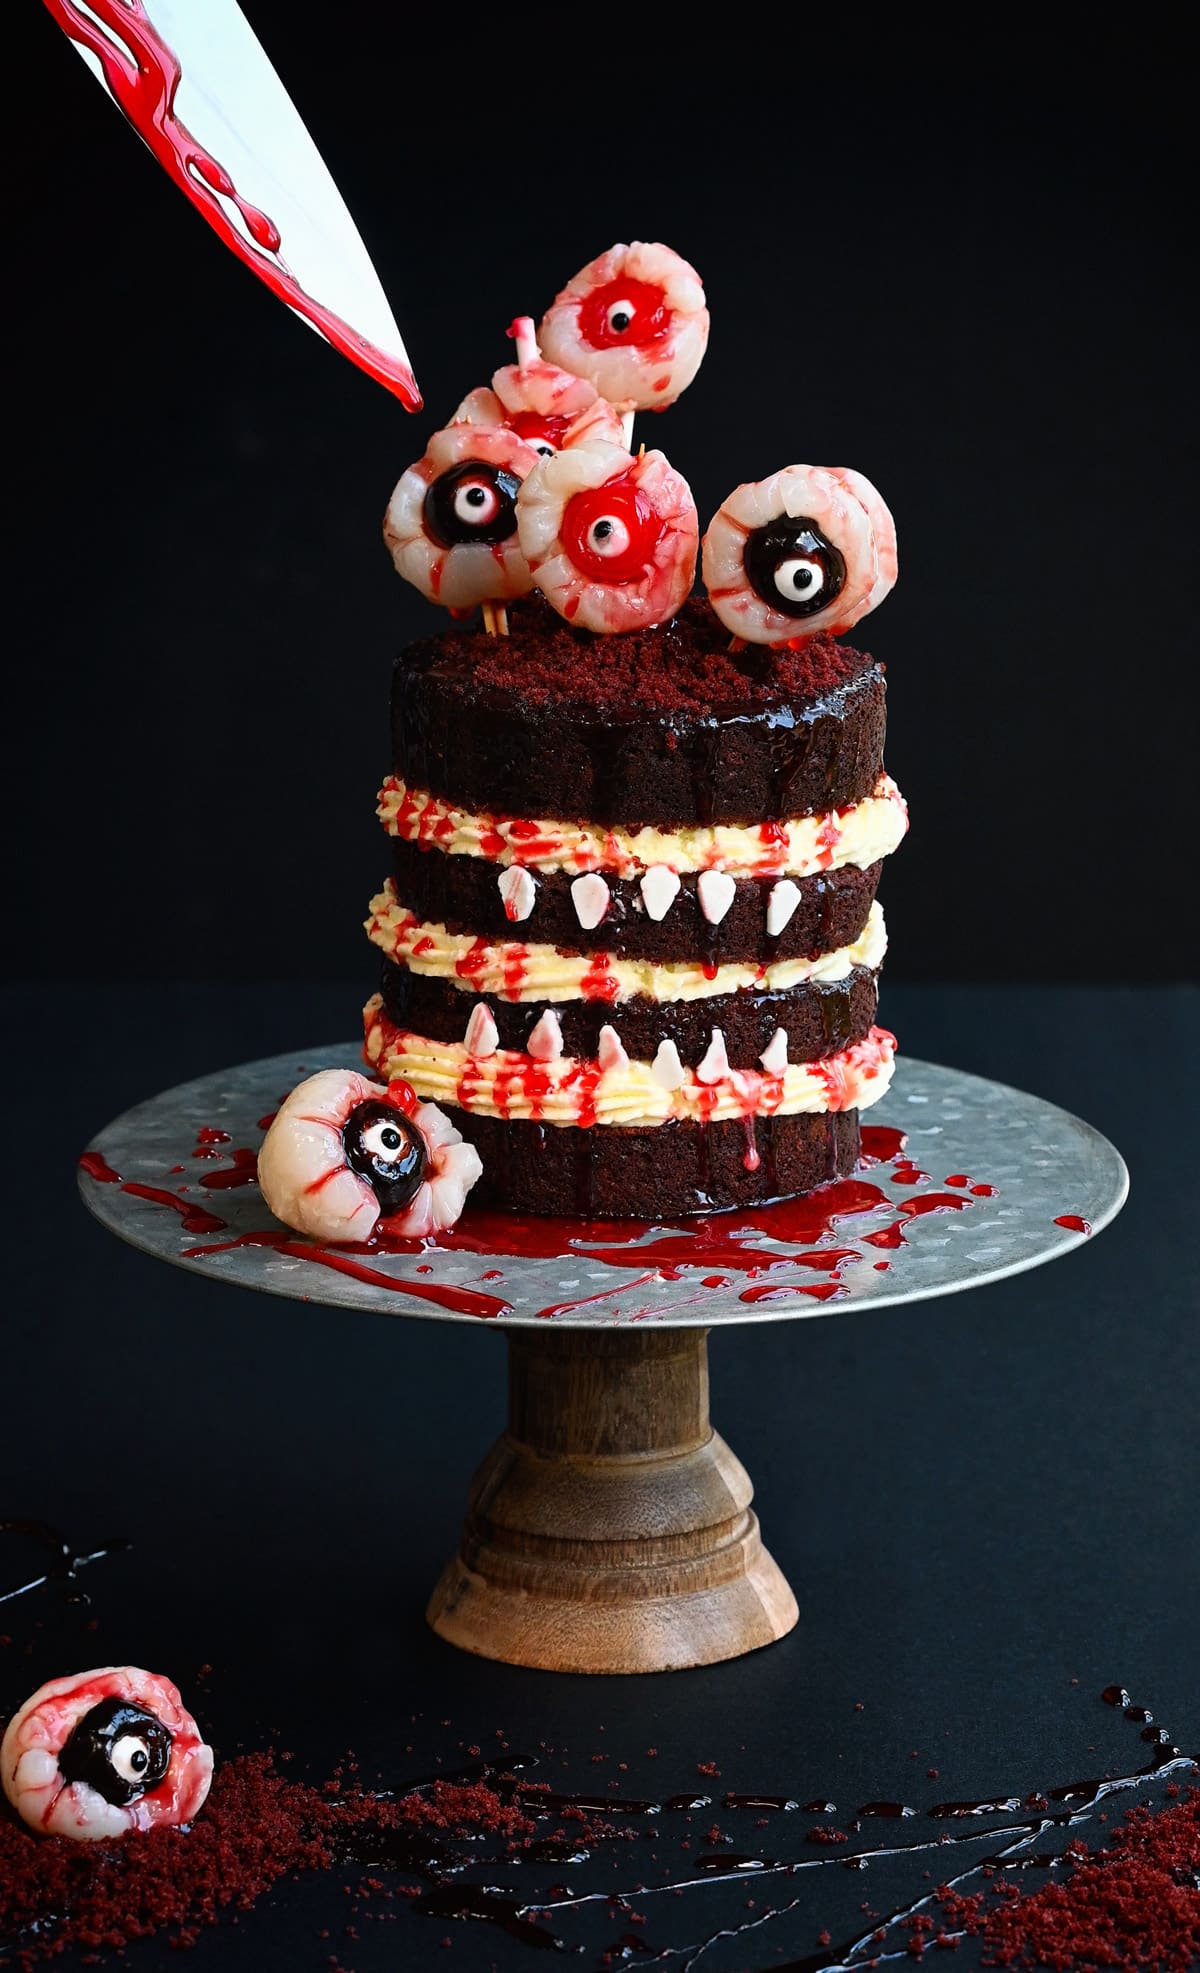 Best candy eyes for any dessert decoration! I learned it from my